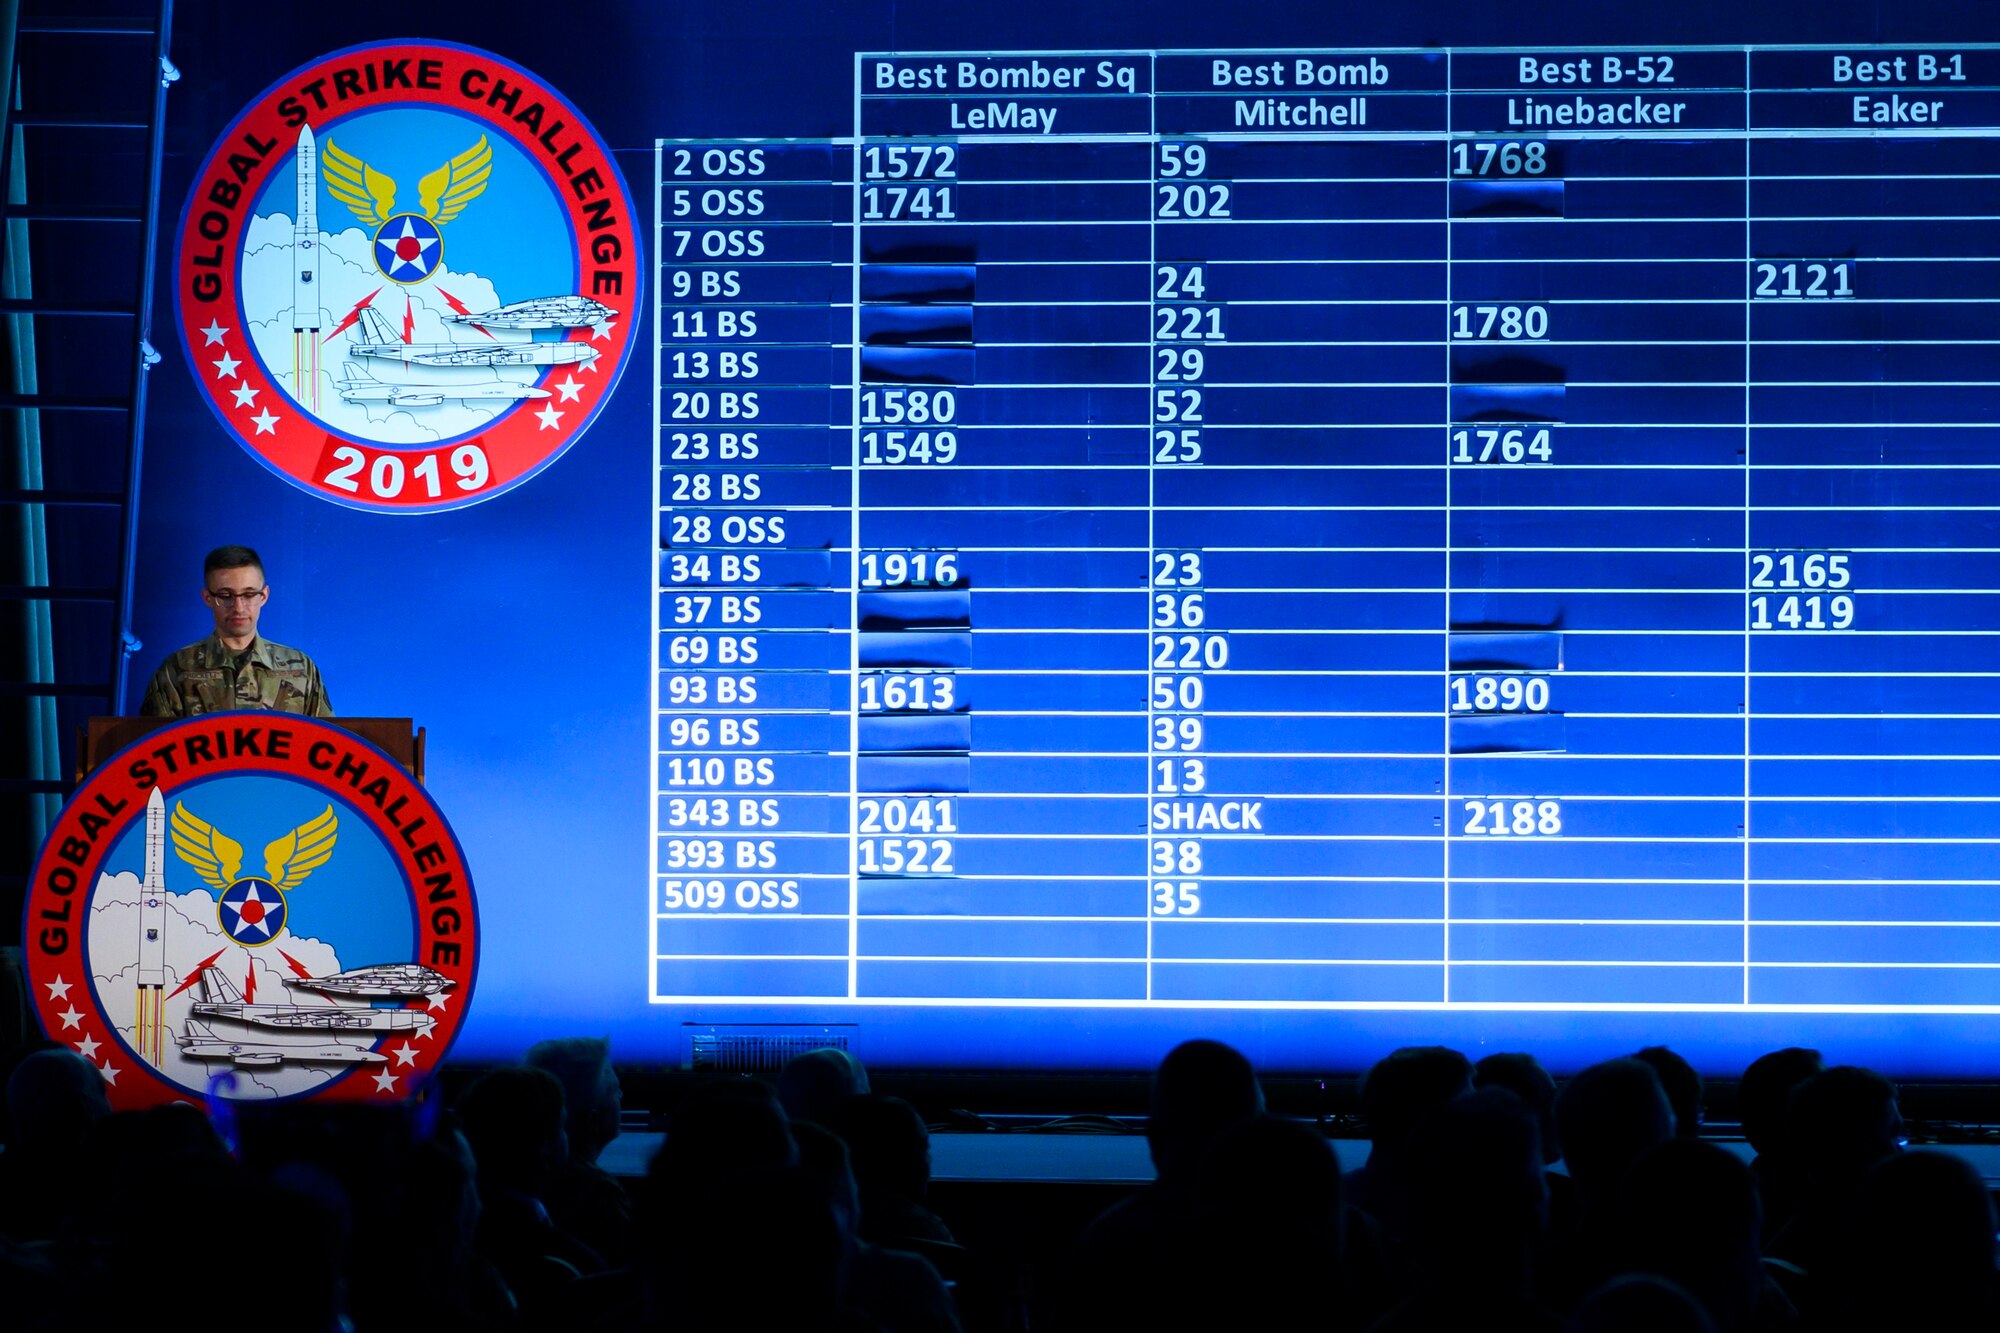 Scoreboard at this year's Global Strike Challenge competition.